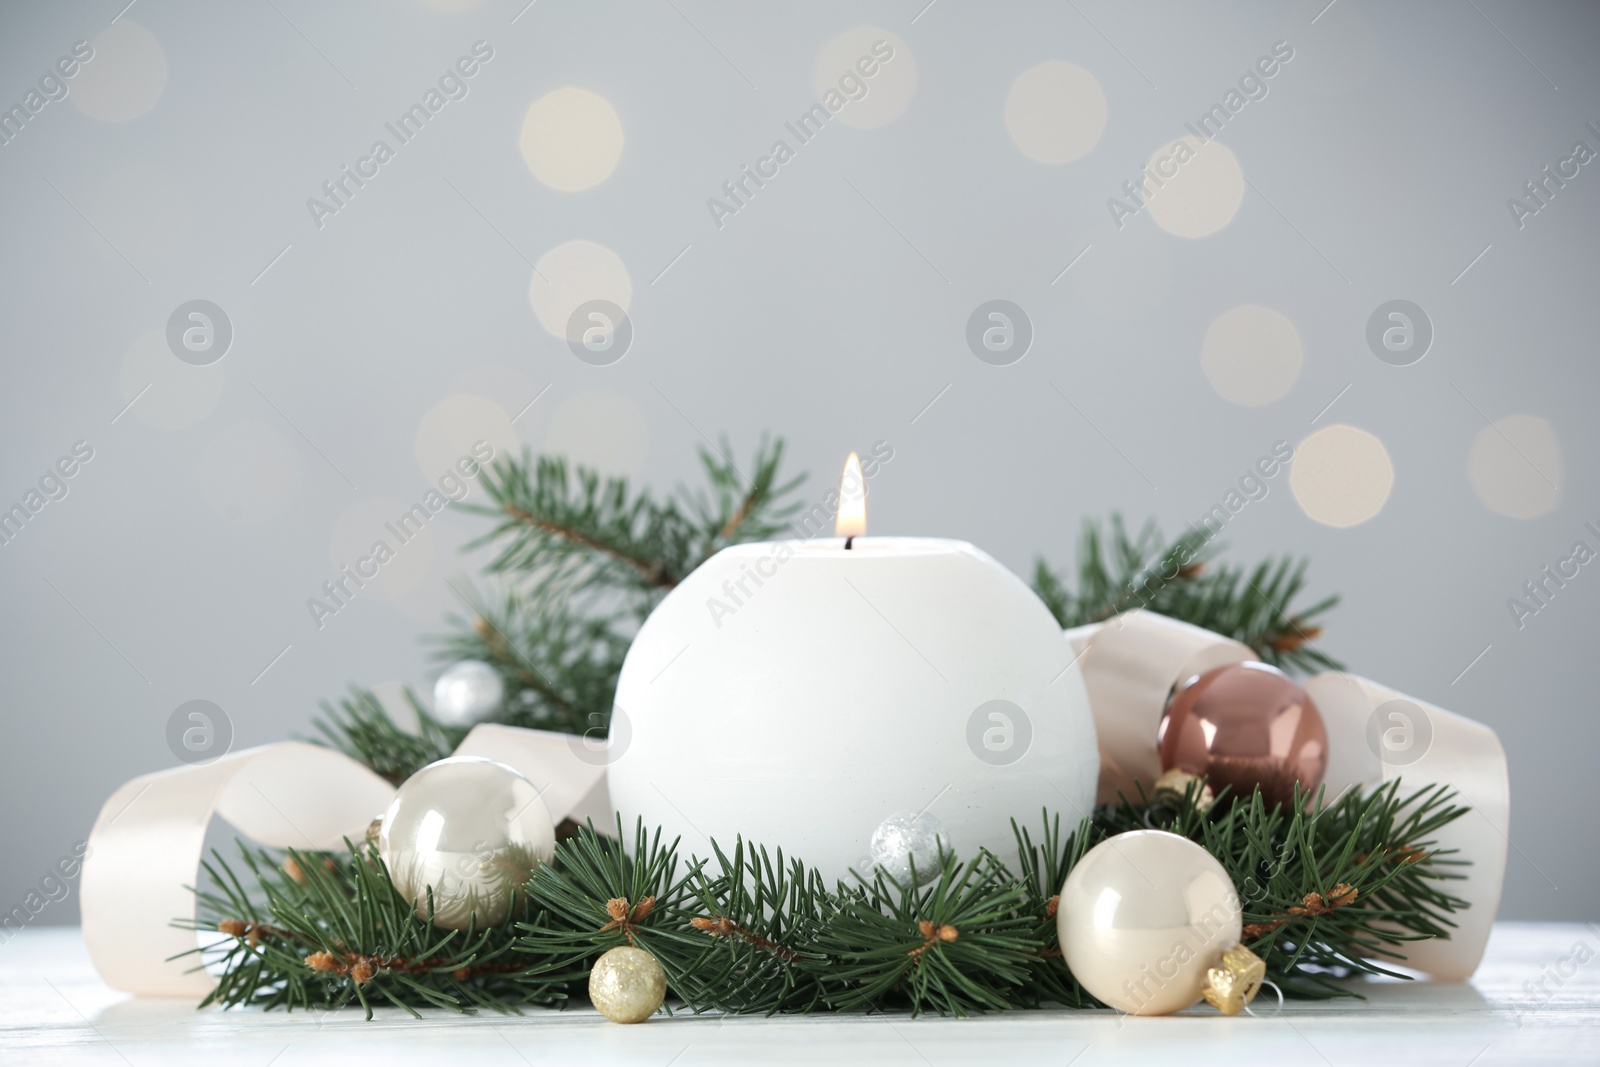 Photo of Burning white candle with Christmas decor on table against blurred lights